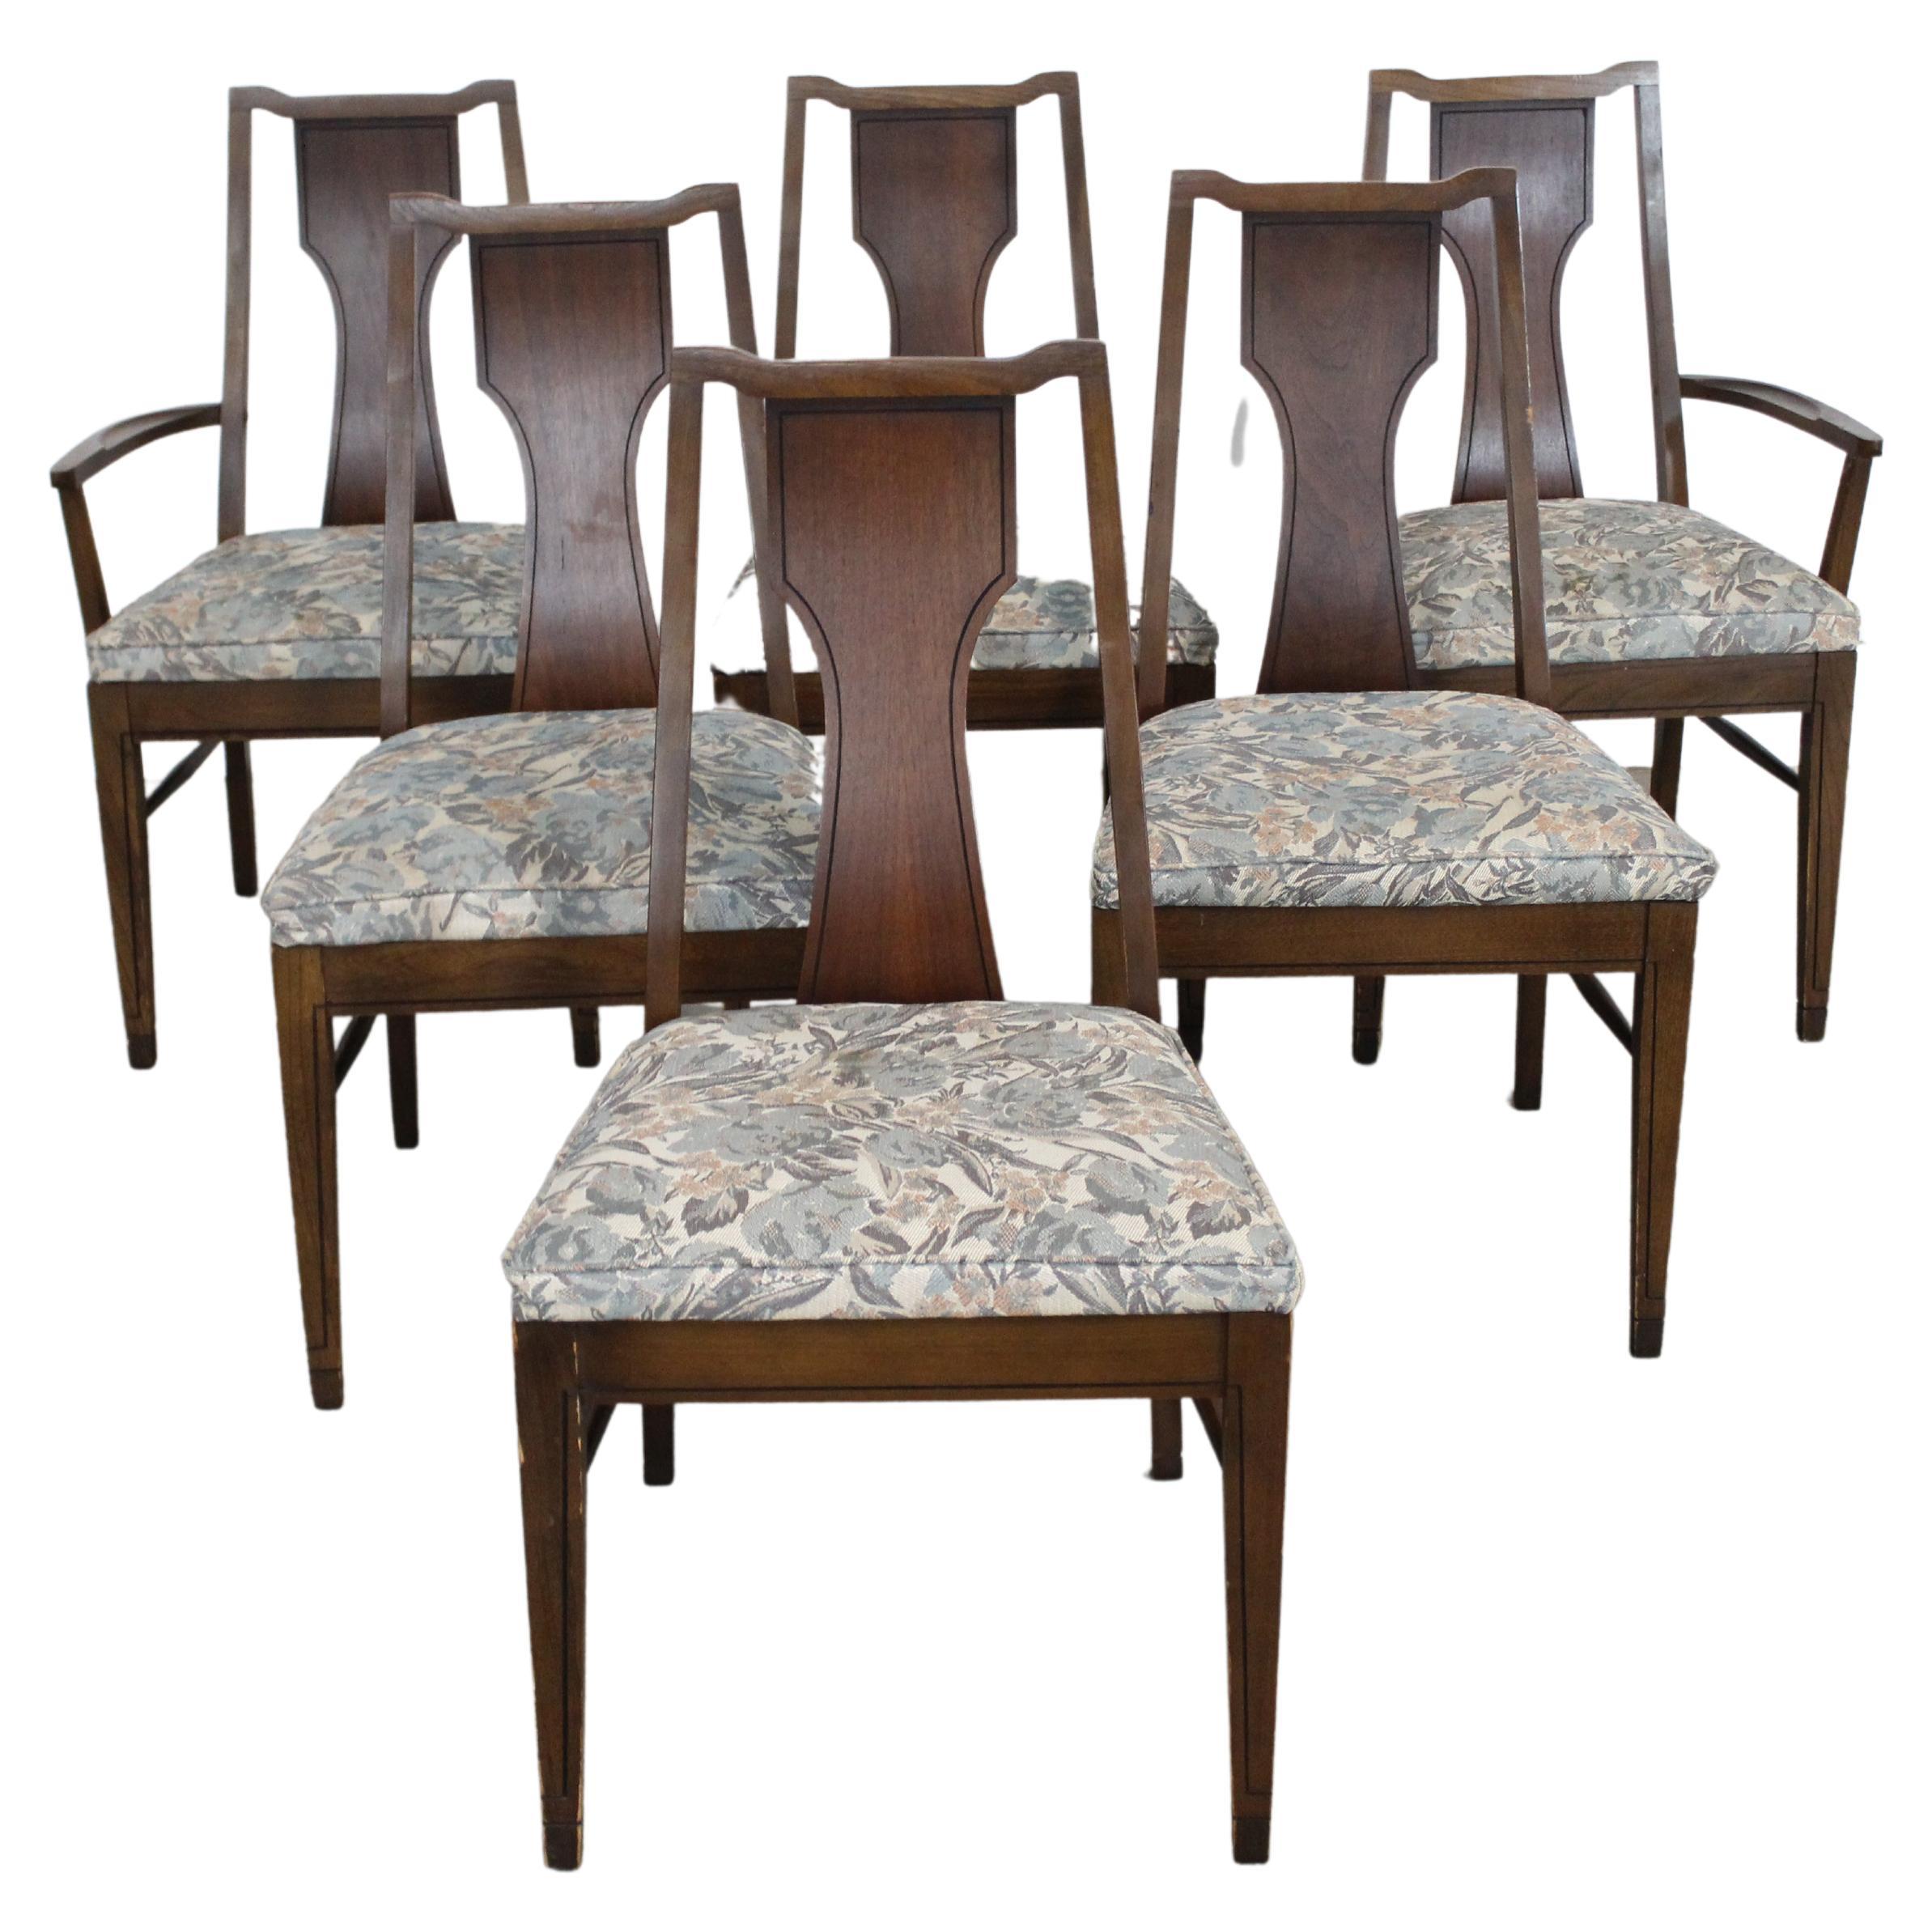 Set of 6 Mid-Century Modern Broyhill Emphasis Walnut Dining Chairs